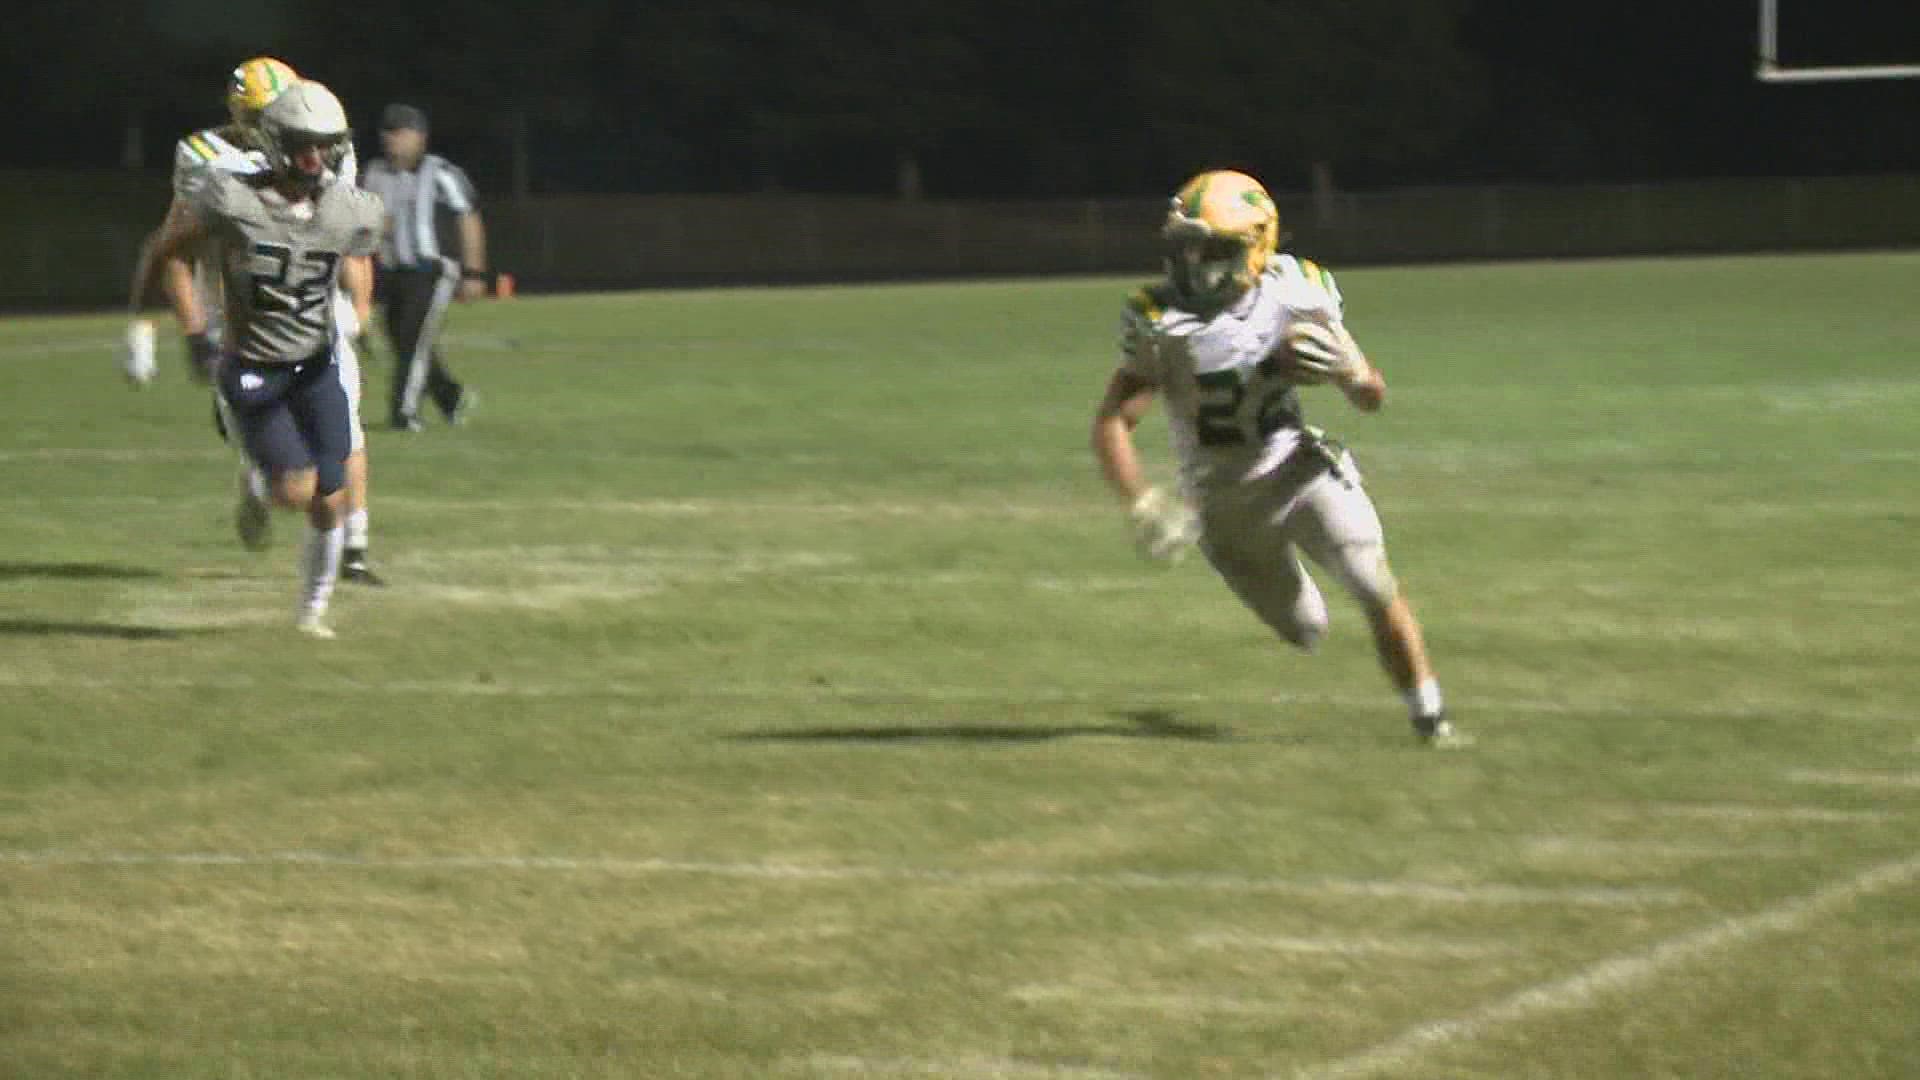 Rocky Mountain defeated Coeur d'Alene in Boise 30-7 while Lakeland defeated Lake City 30-21.